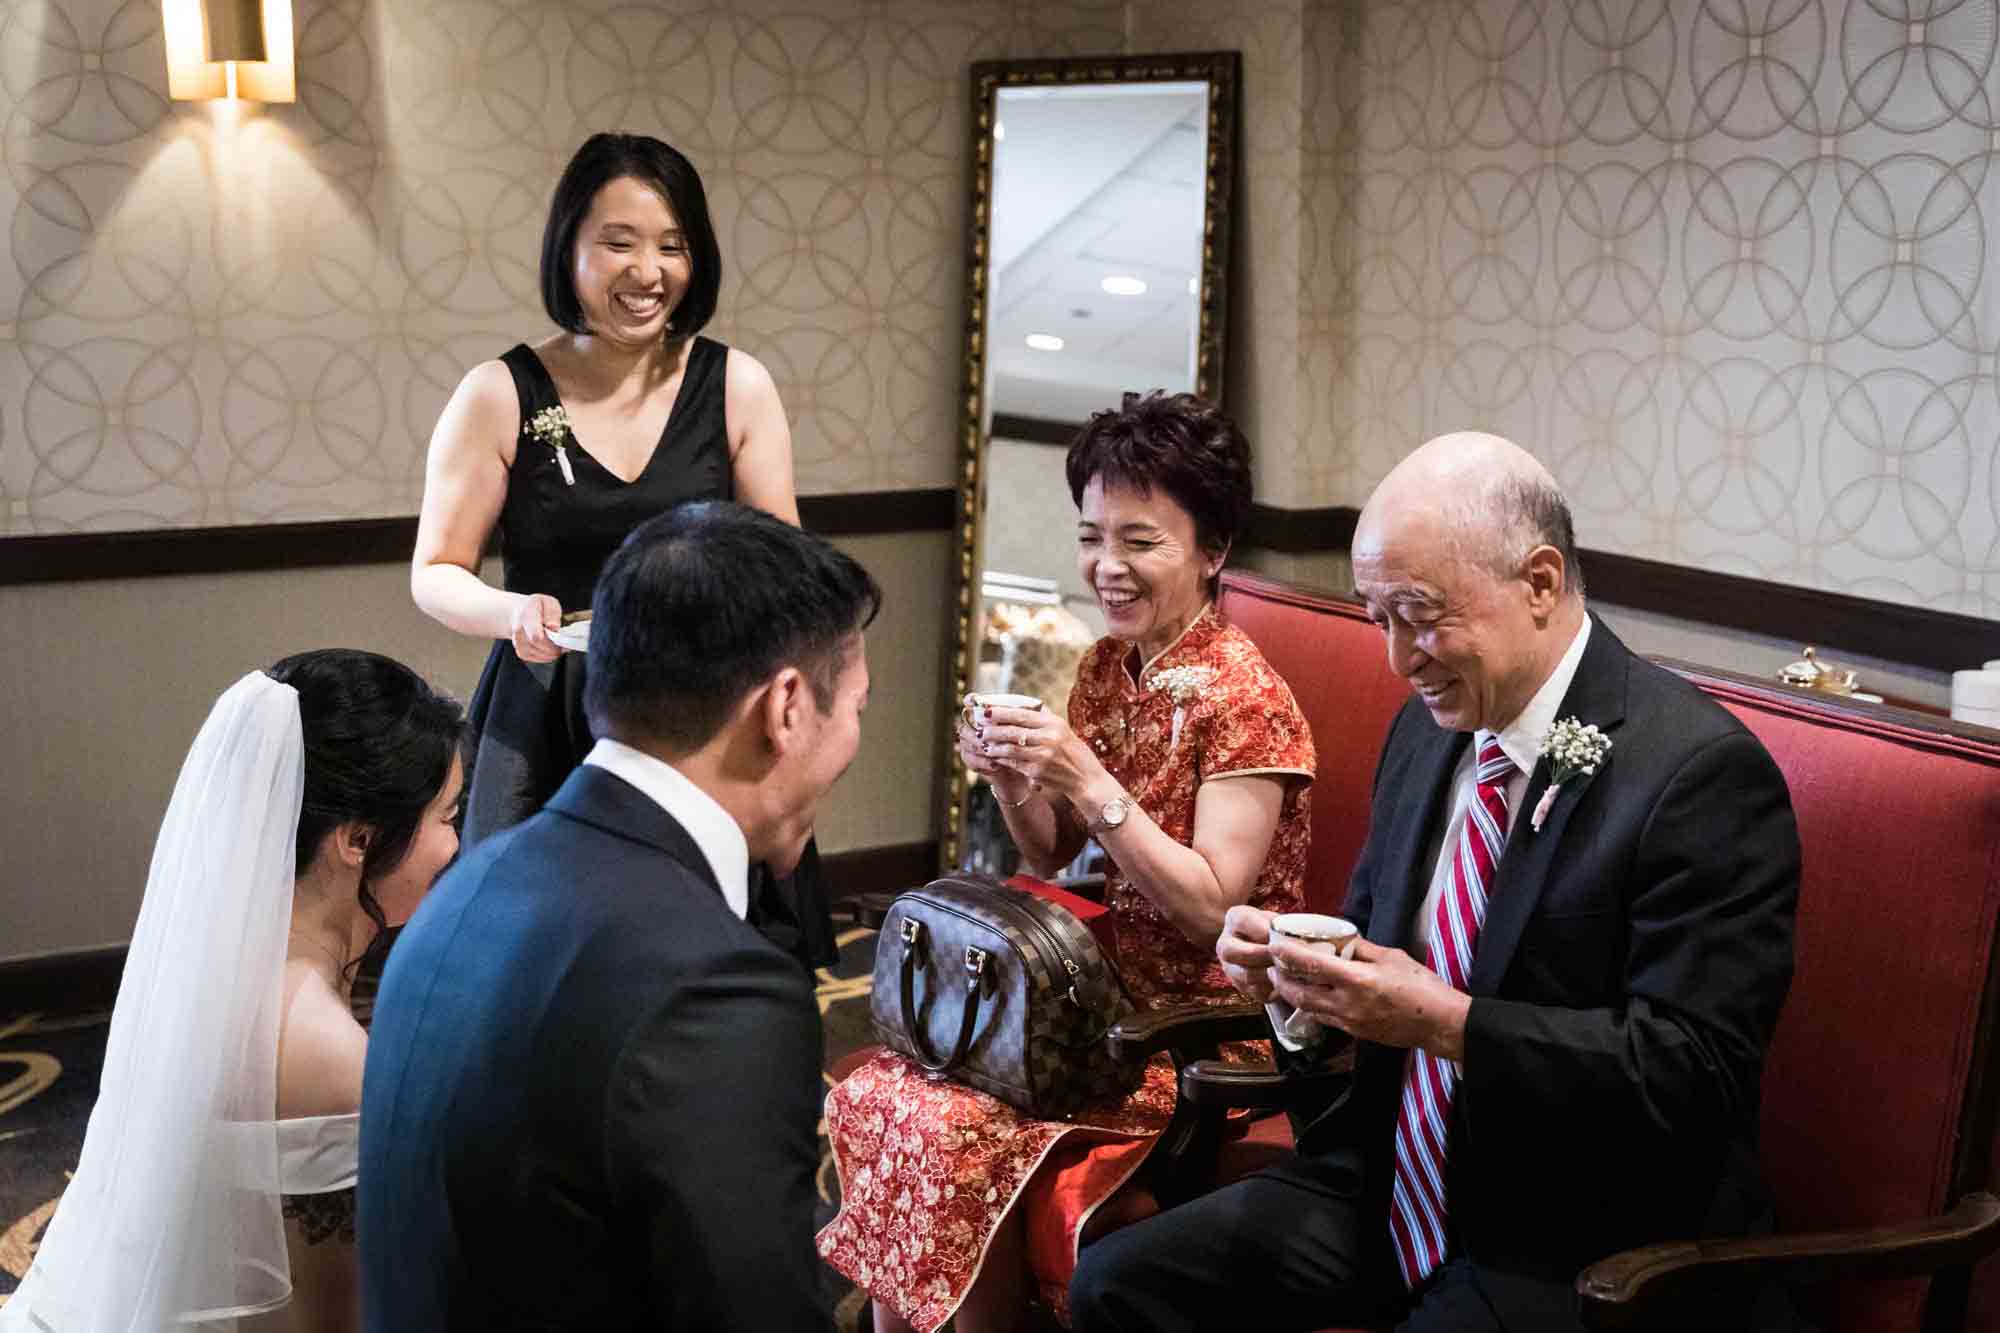 Parents accepting cups of tea from bride and groom at a Sheraton LaGuardia East Hotel wedding